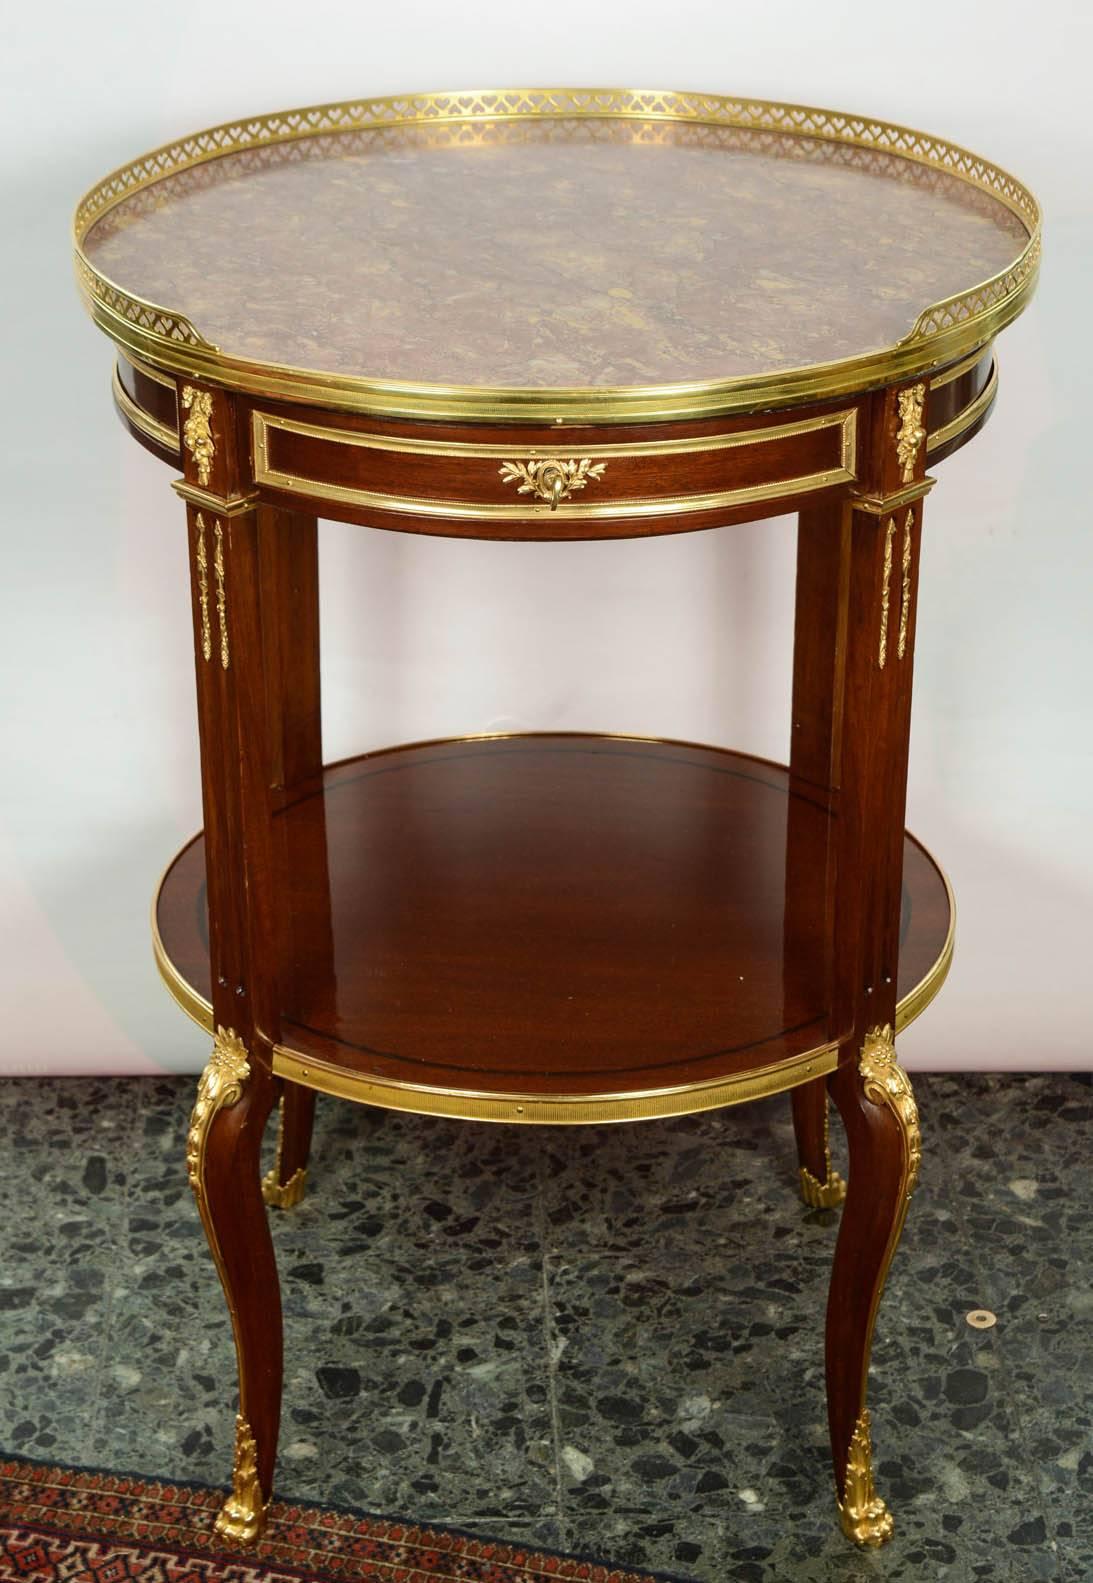 Pair of round tables in varnished mahogany, decorated with gilded bronzes, topped with a marble breche, one drawer in the belt.